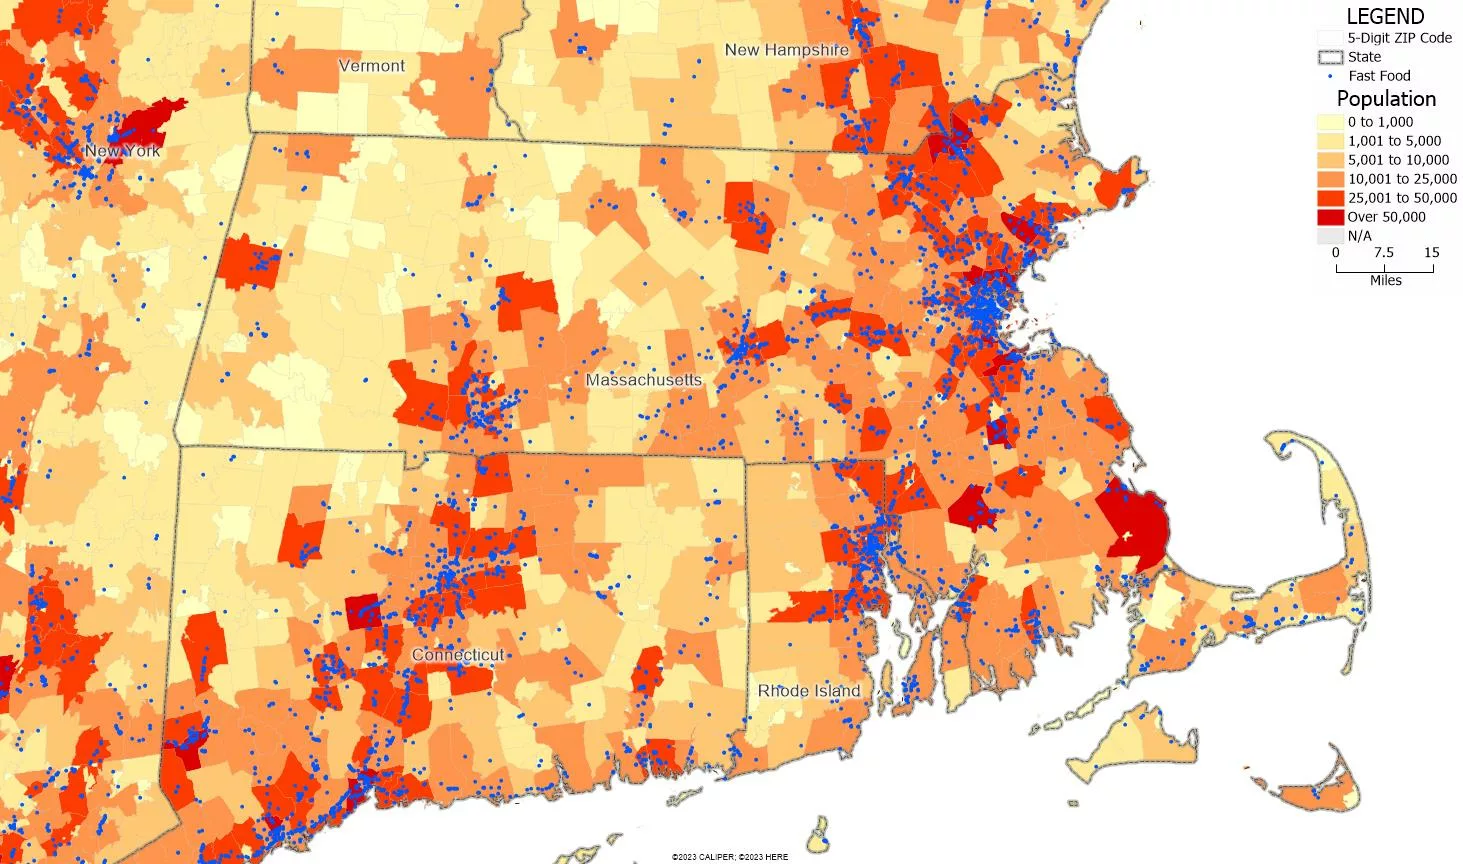 How Do You Map a Franchise Territory? Map of Fast Food Restaurant Locations.